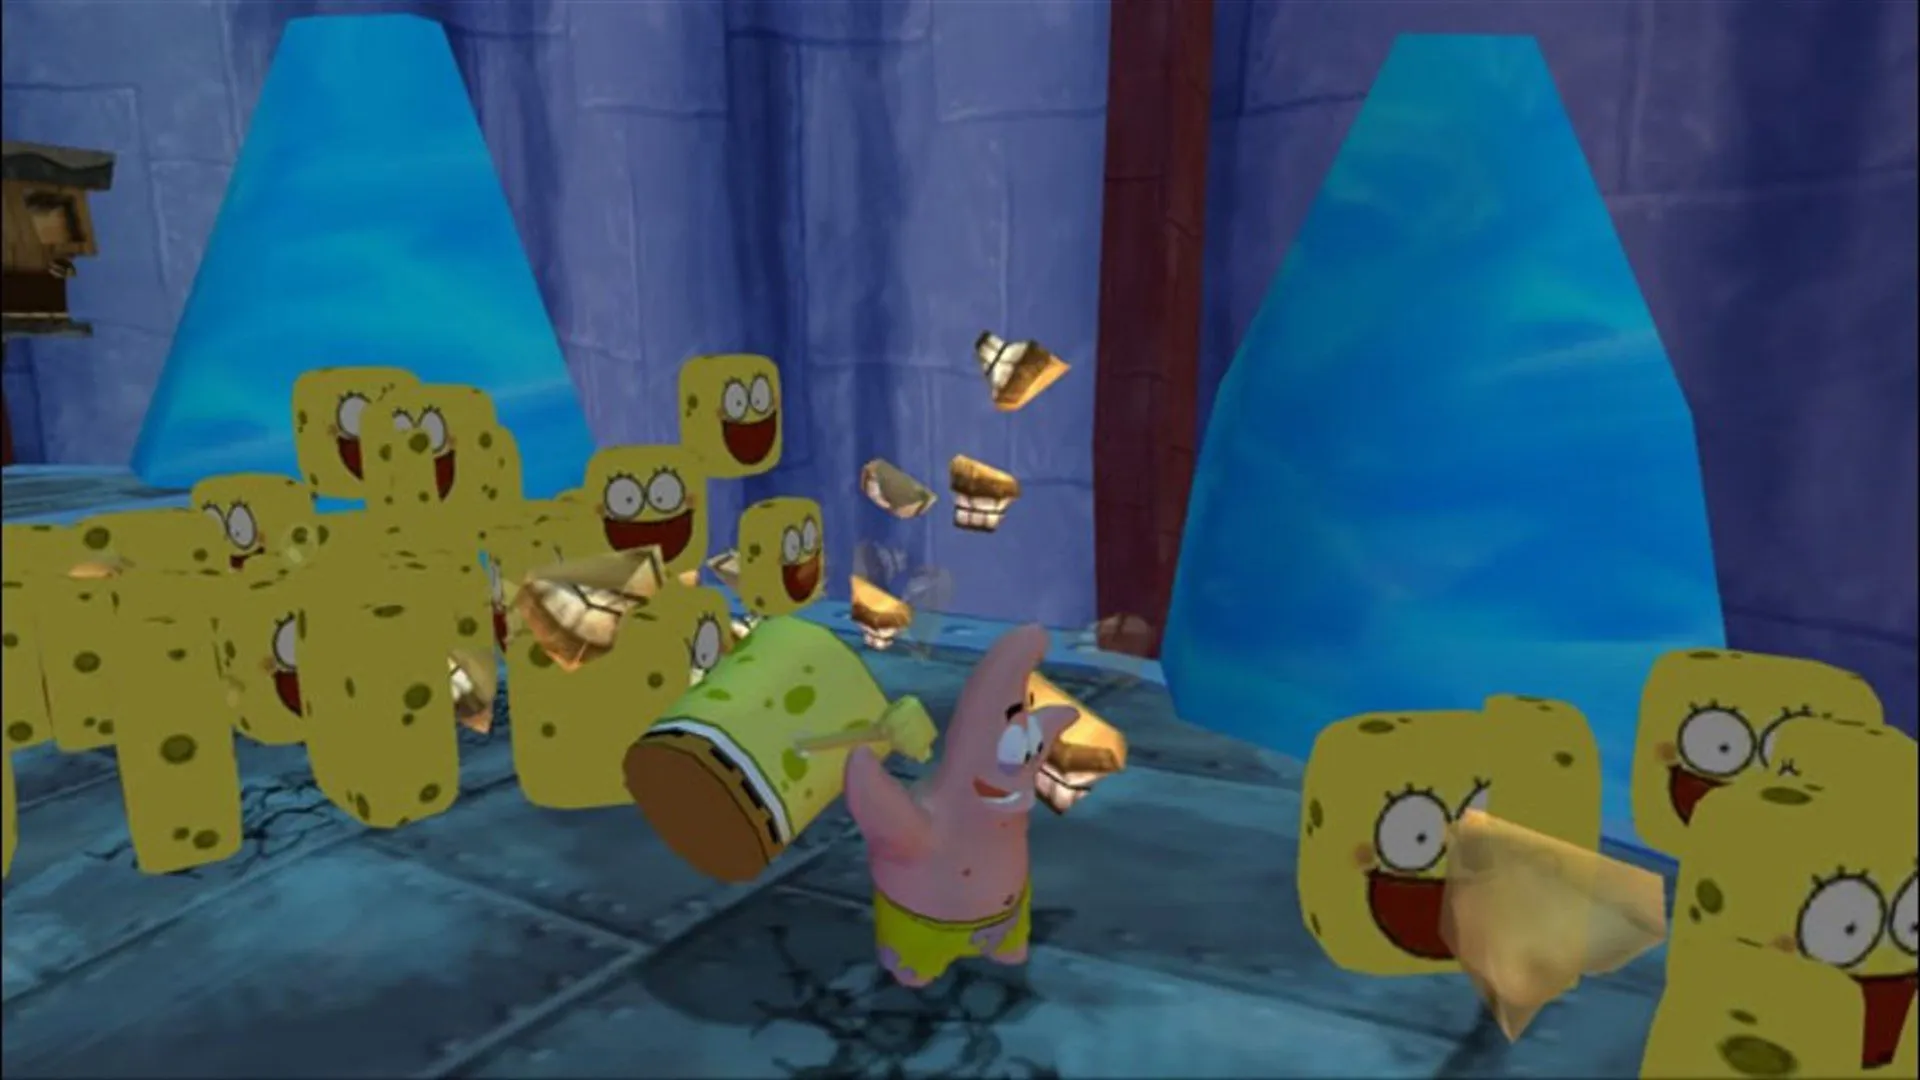 Xbox Games with Gold March includes SpongeBob's Truth or Square